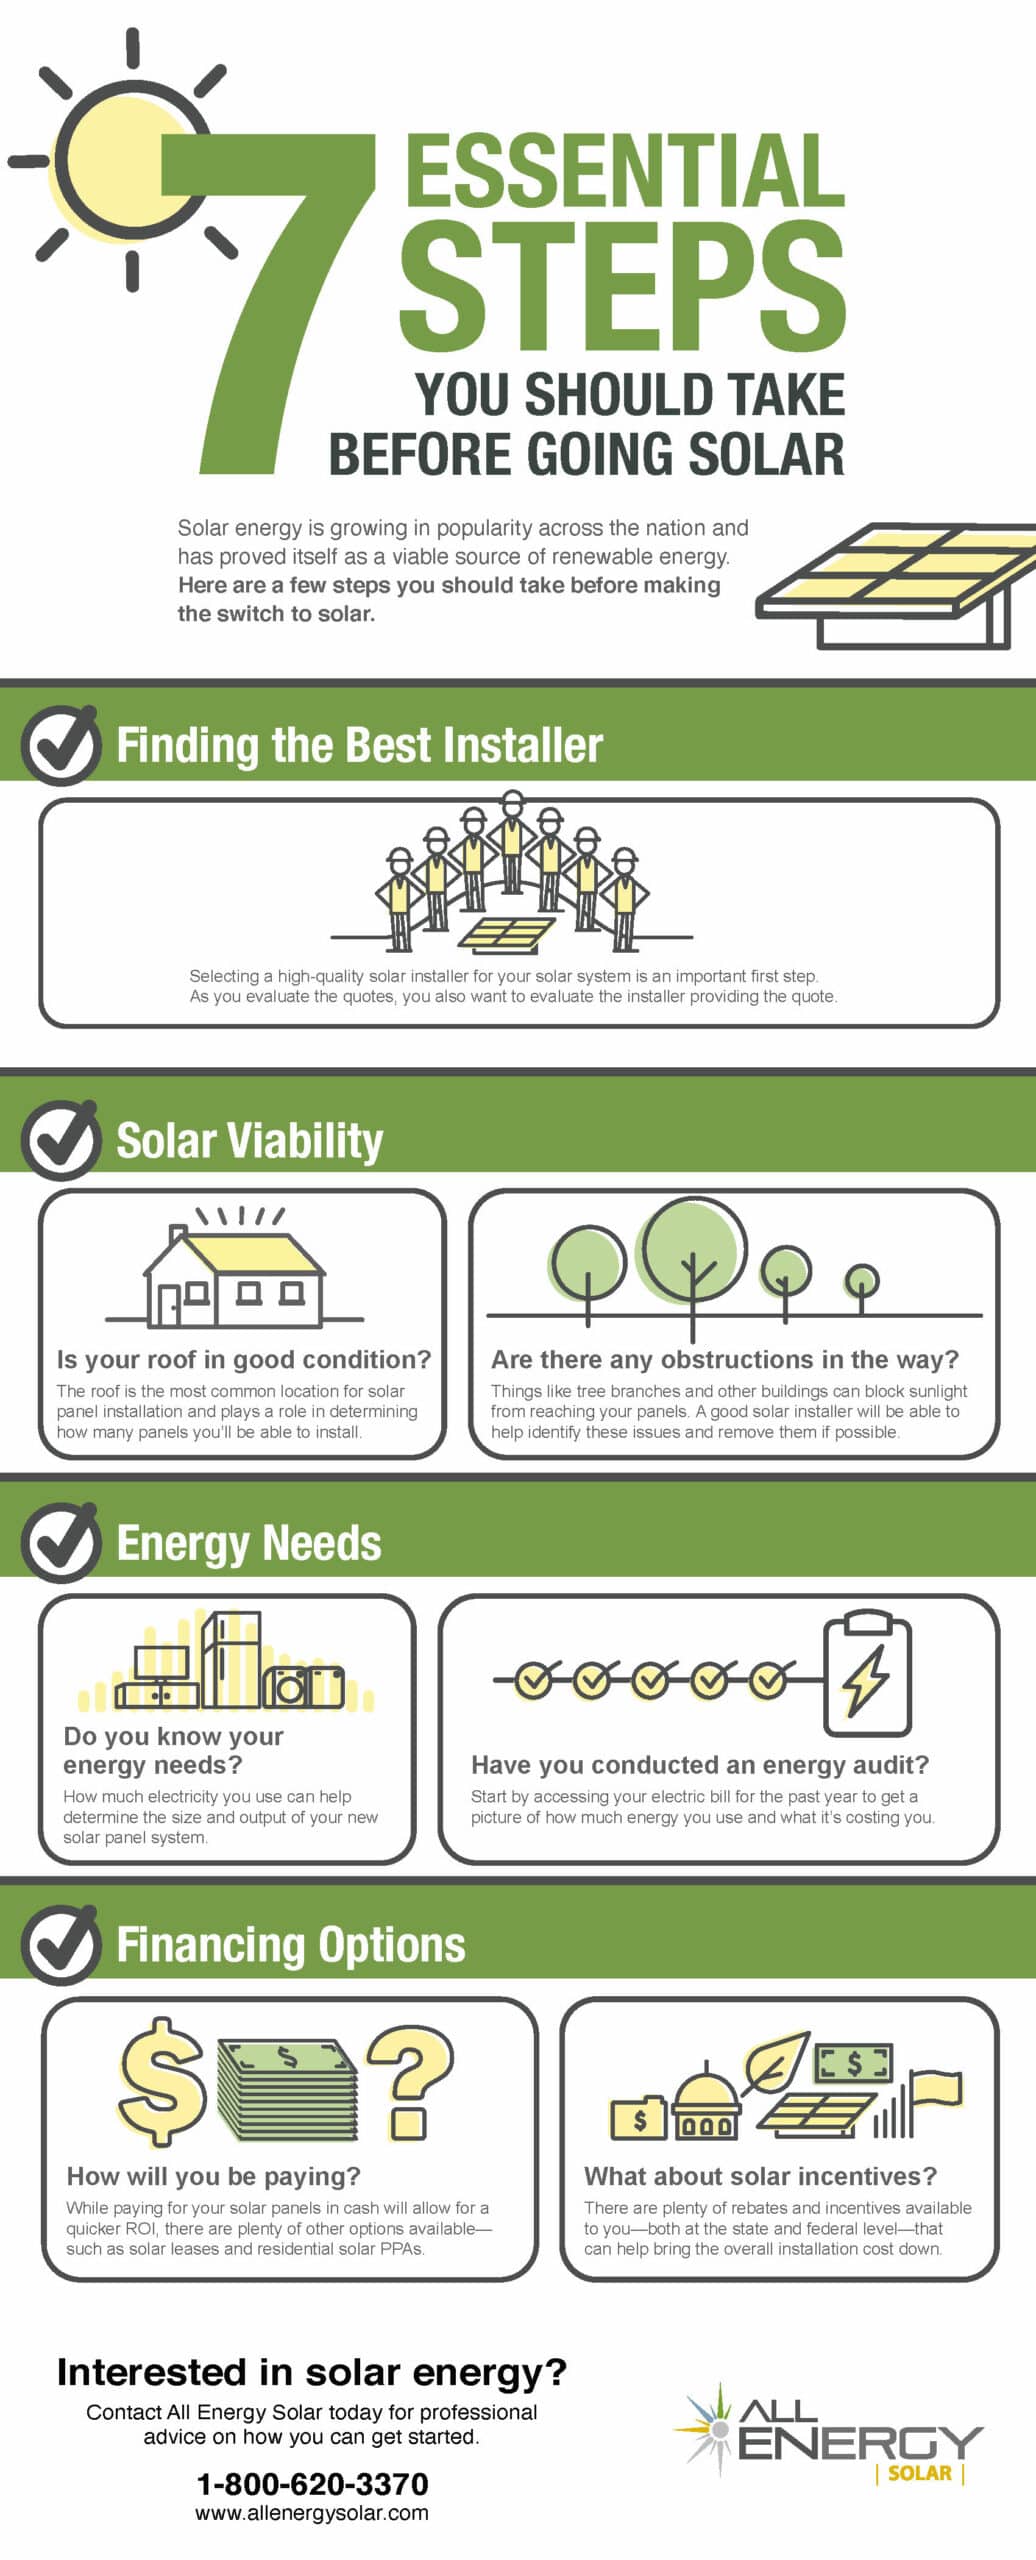 7 essential steps to take before going solar, a checklist